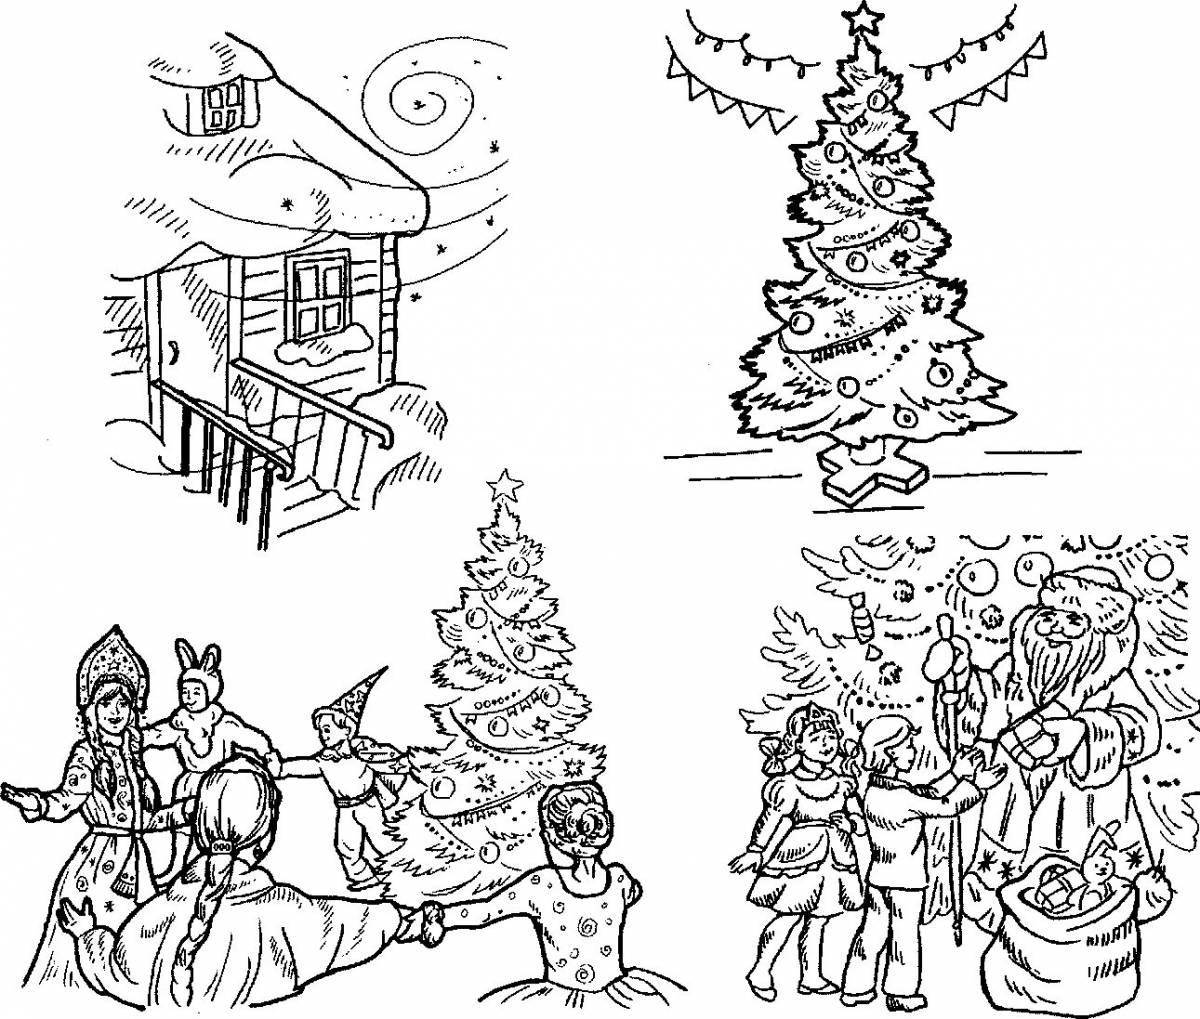 Glitter Christmas coloring book